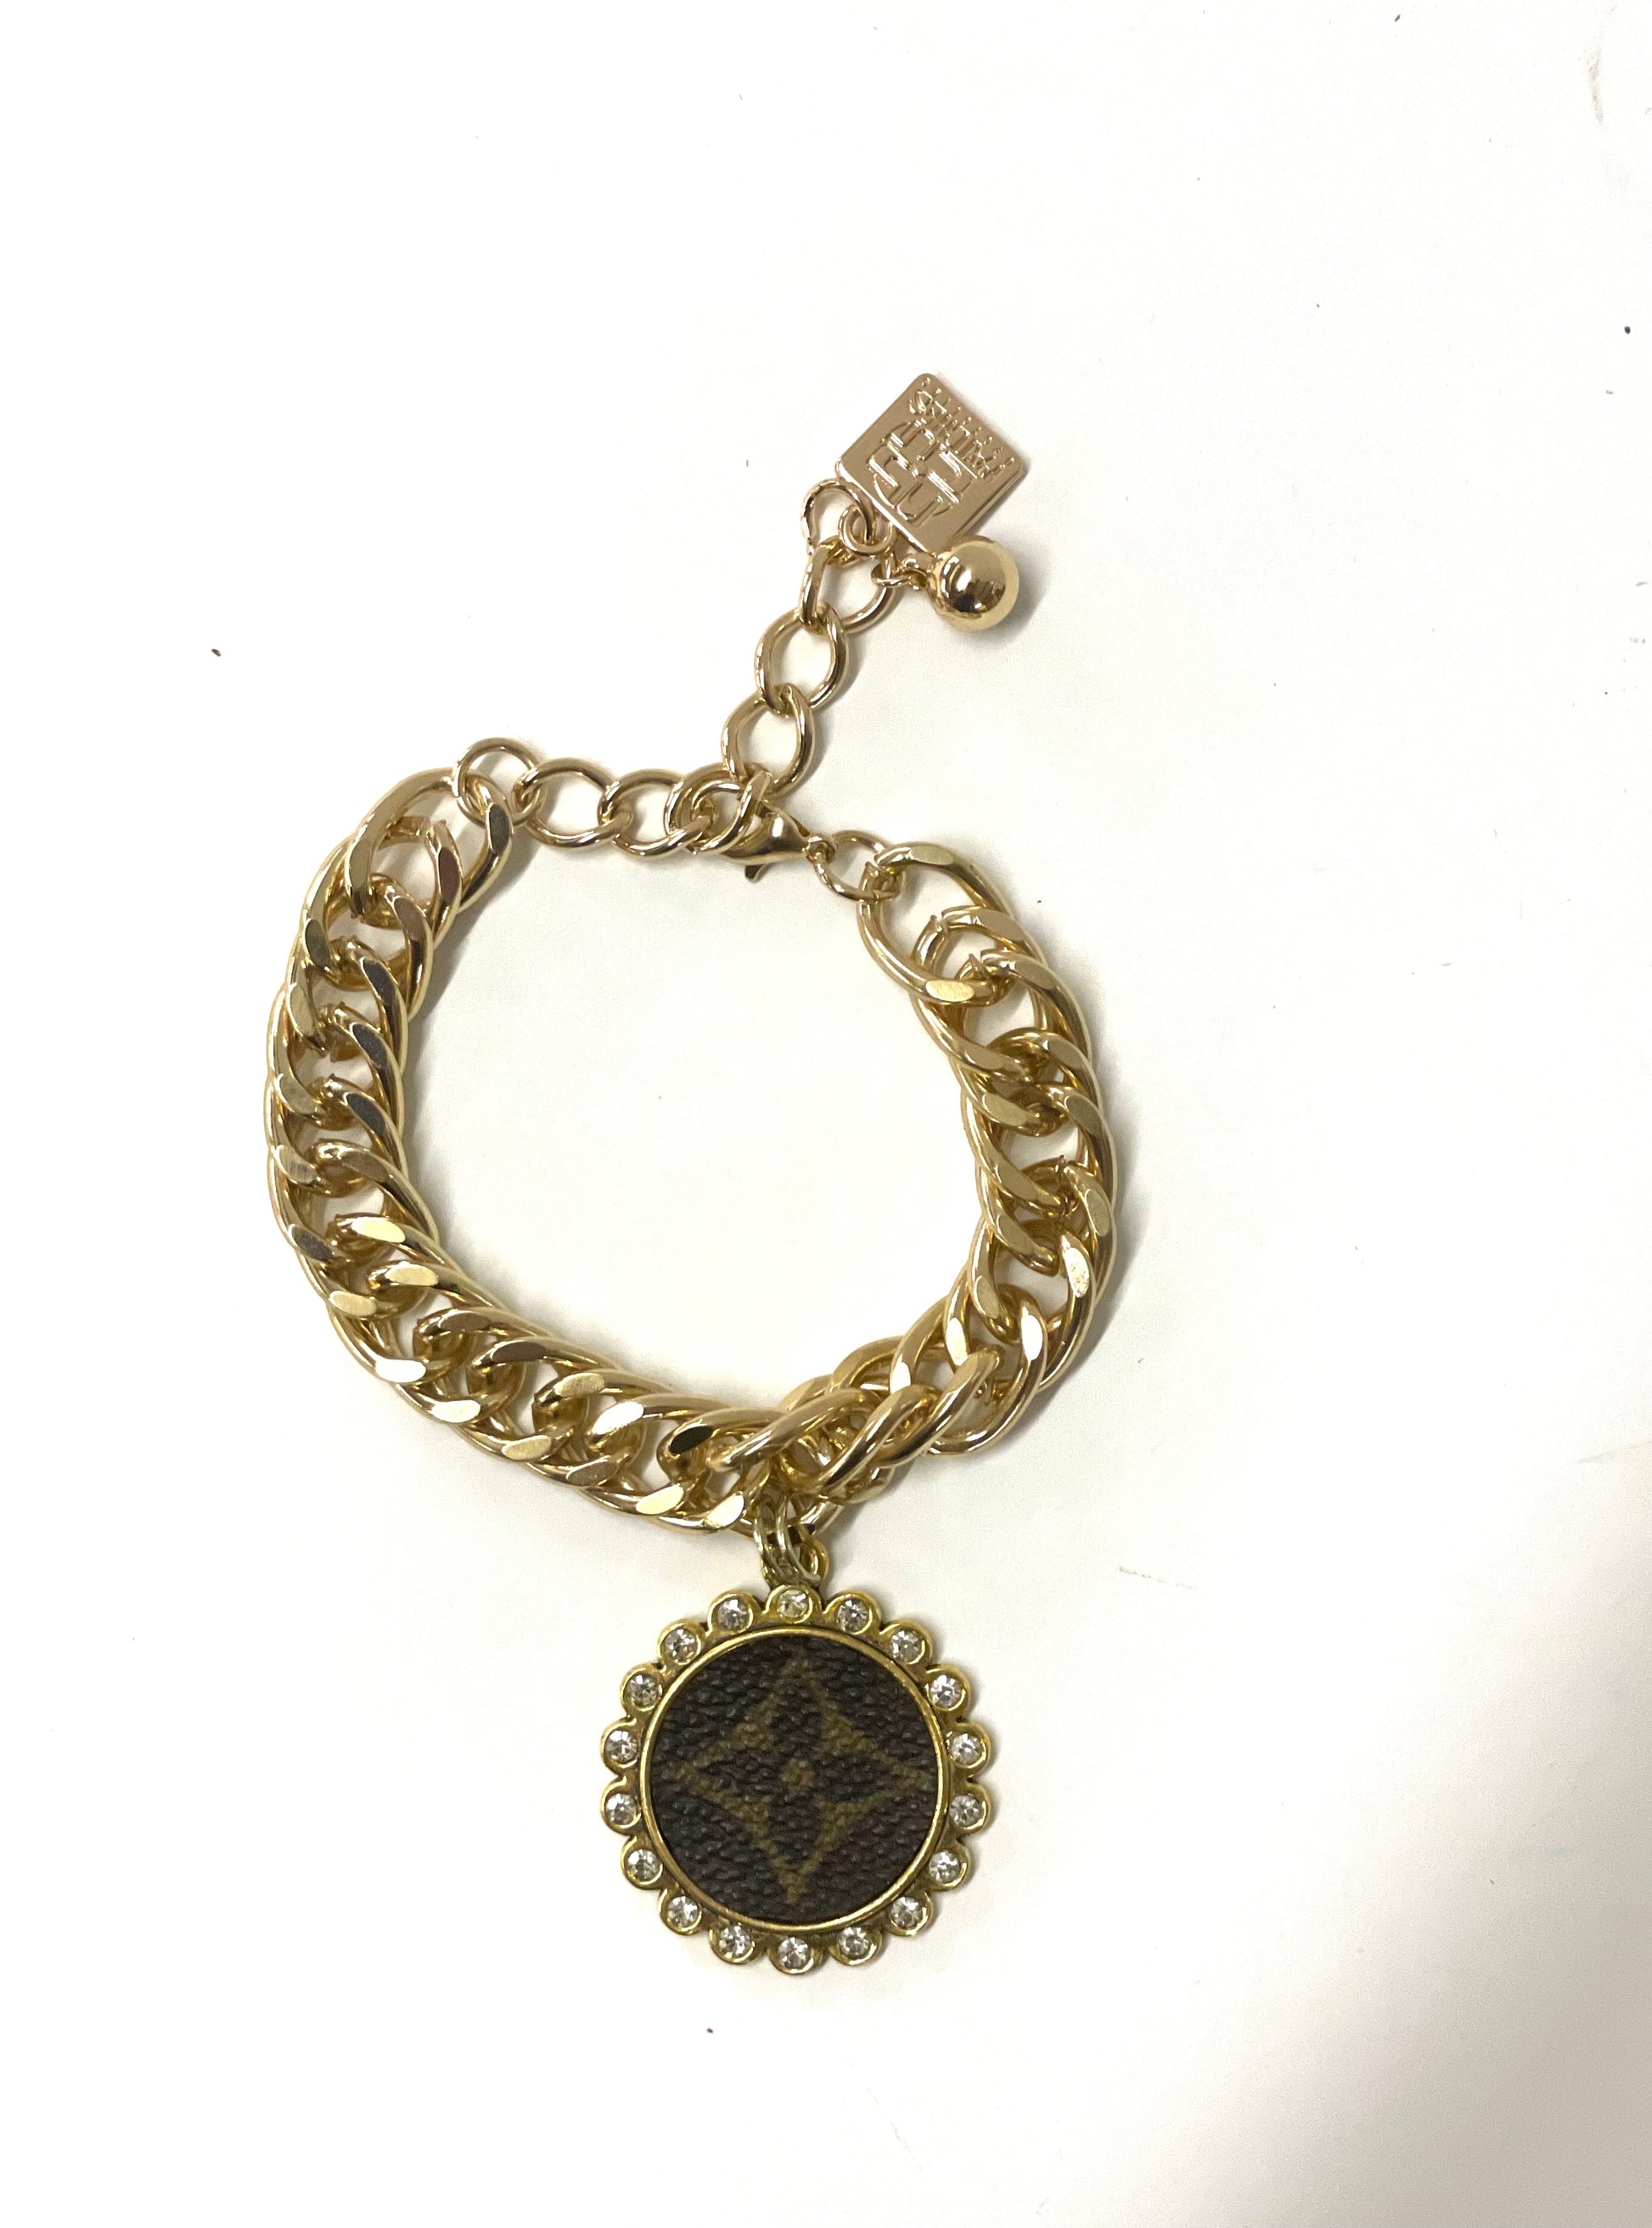 Heavy chain bracelet in gold with 25 mm gold pendant - Patches Of Upcycling